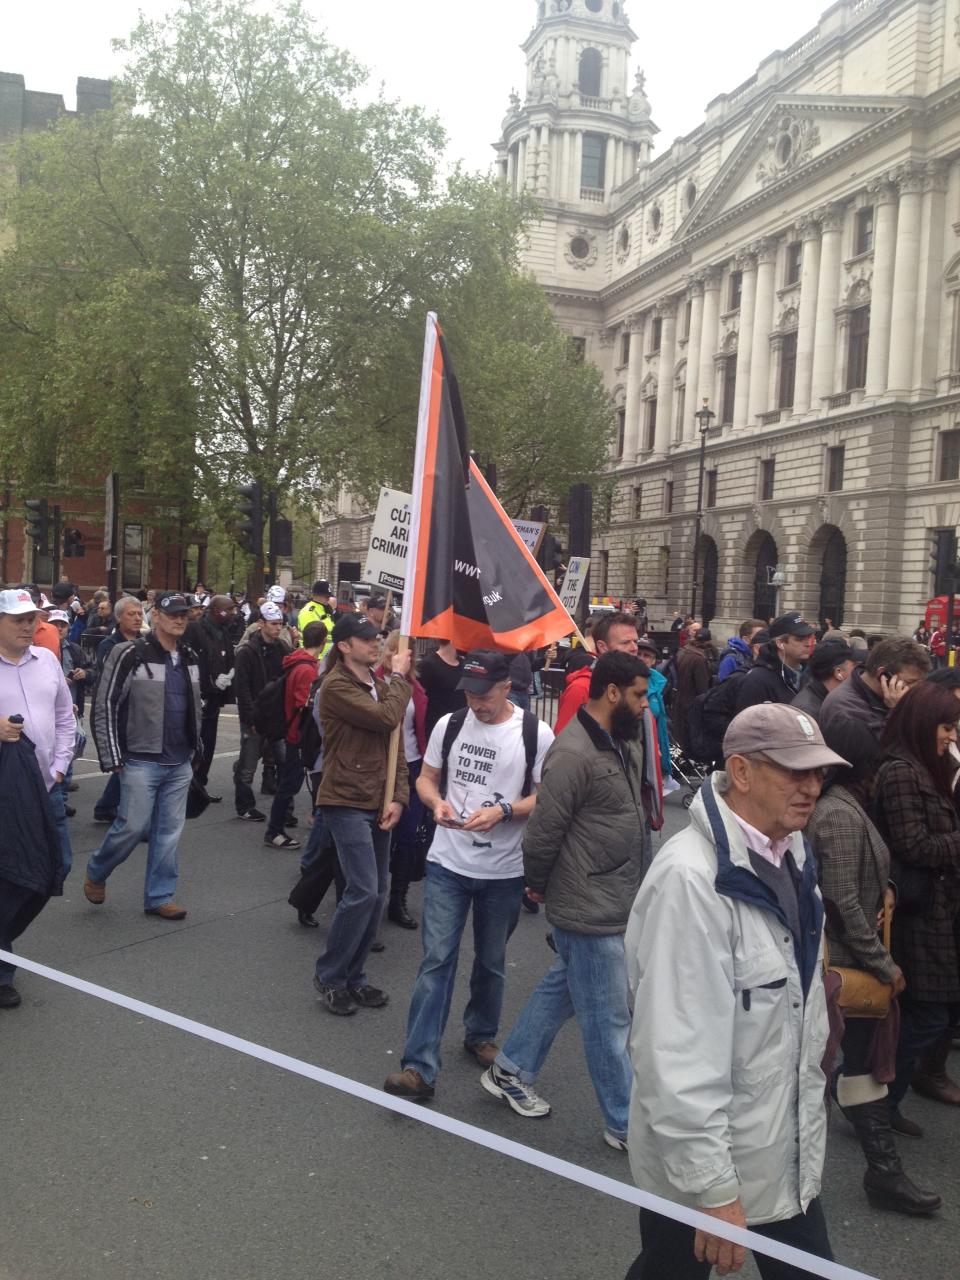 March against police cuts